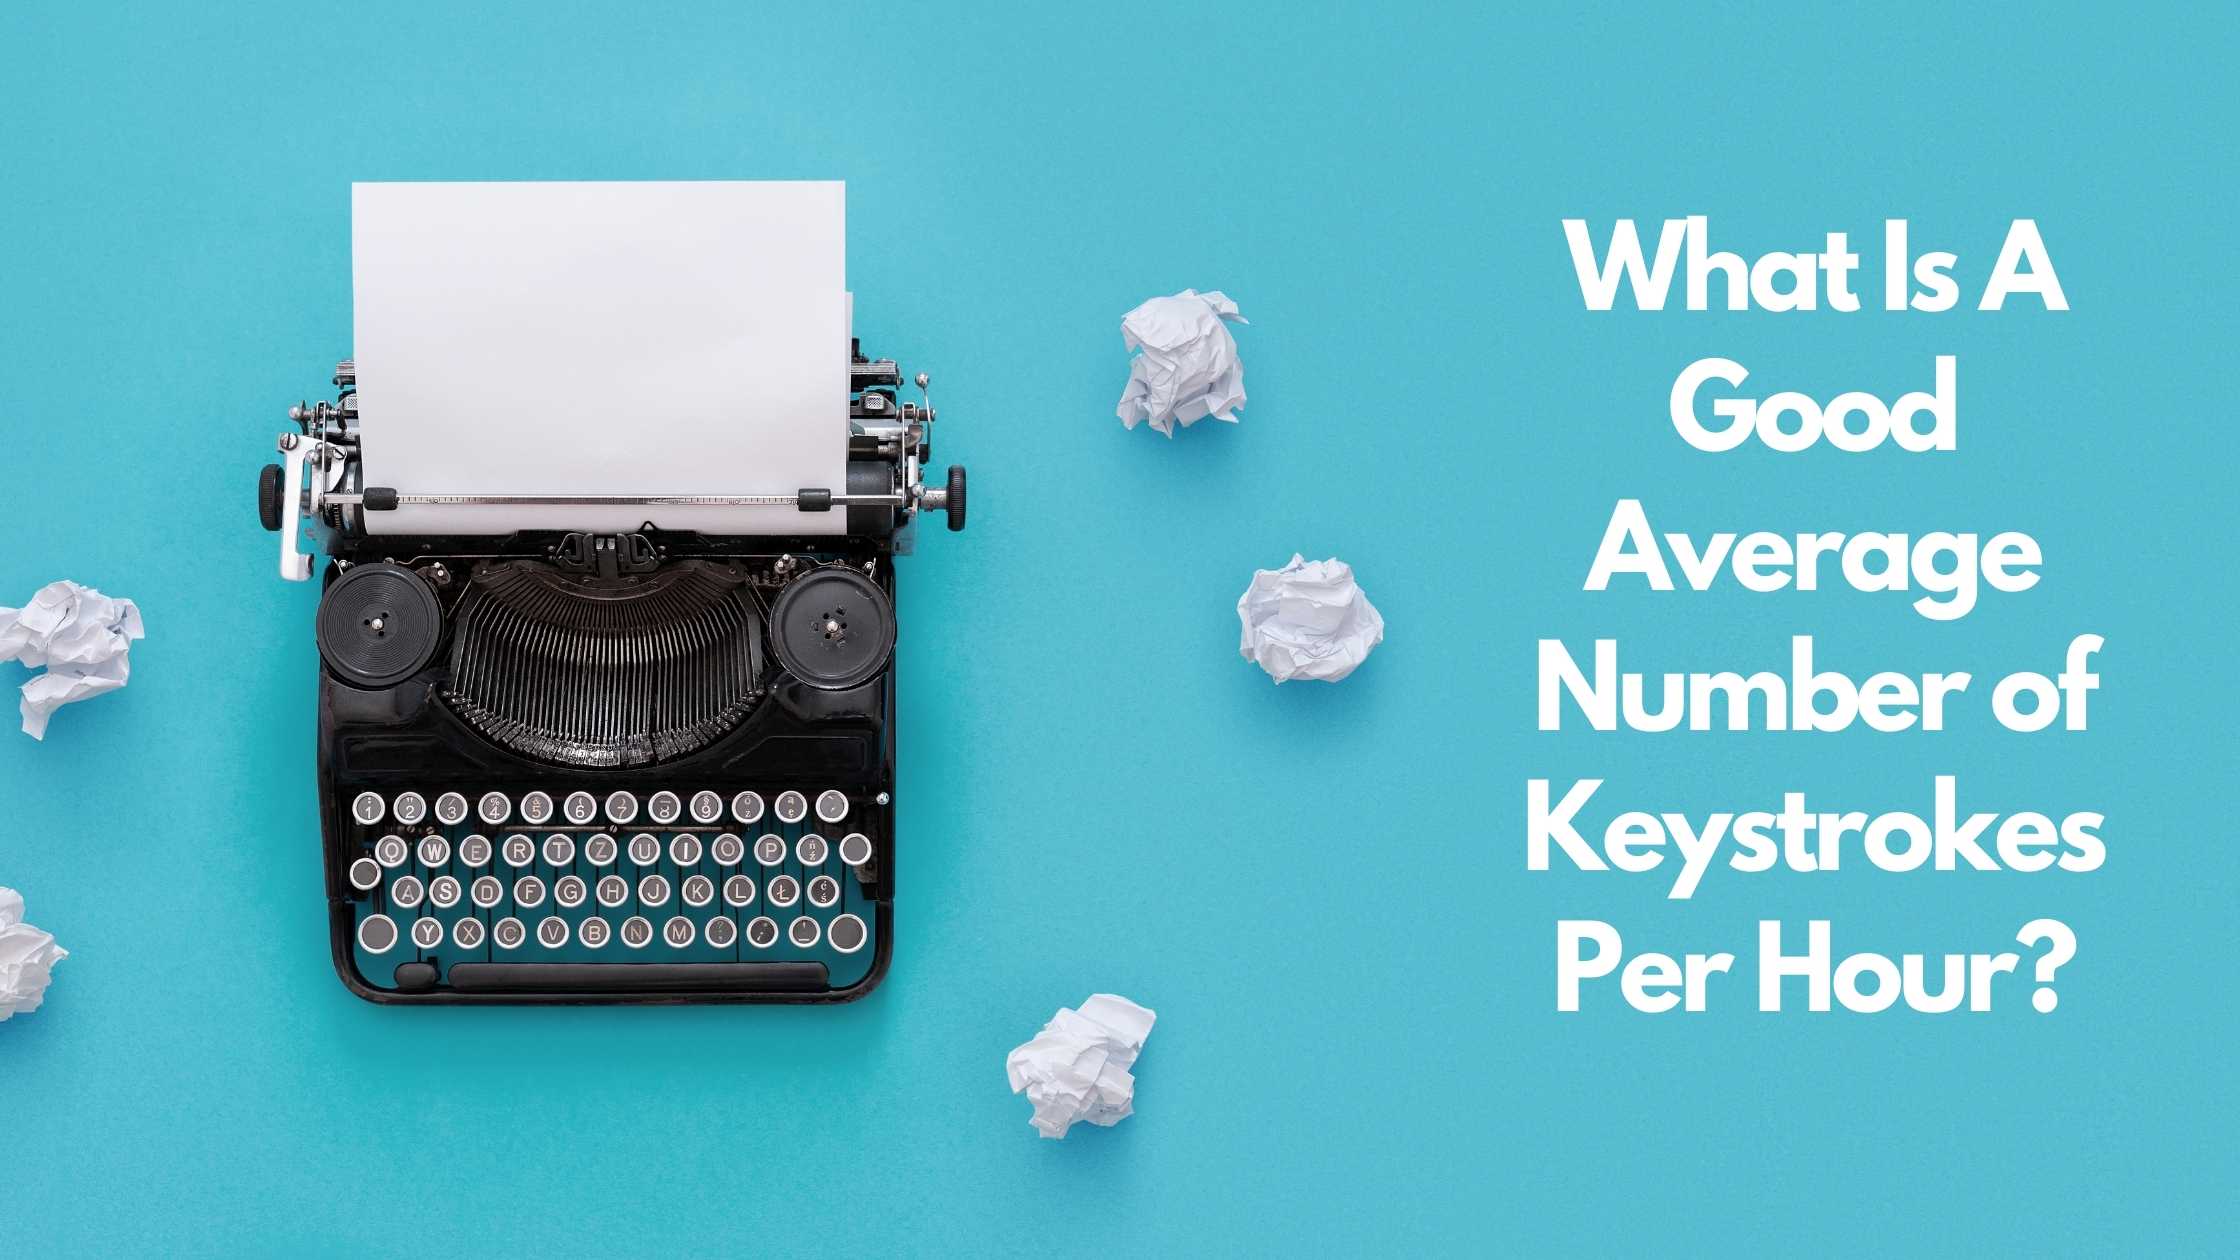 What is a good average number of keystrokes per hour